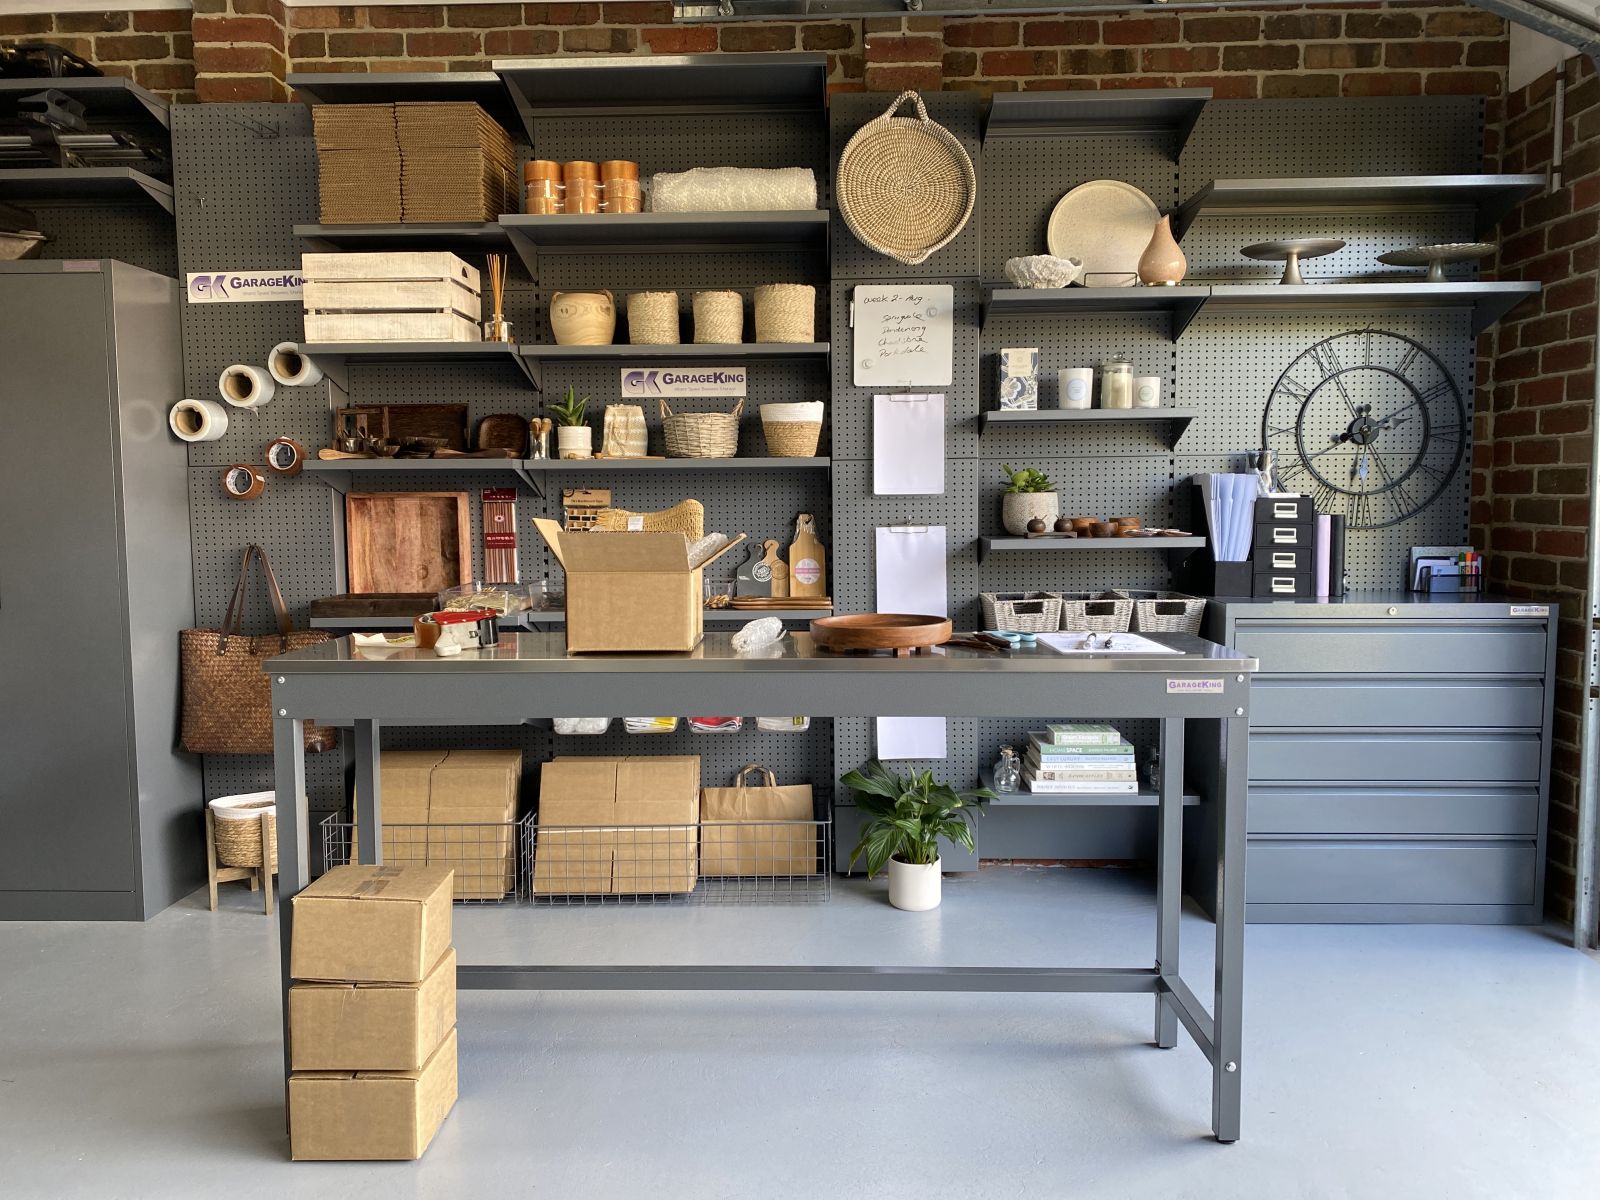 A homewares storage shelving system for a homewares business in a garage